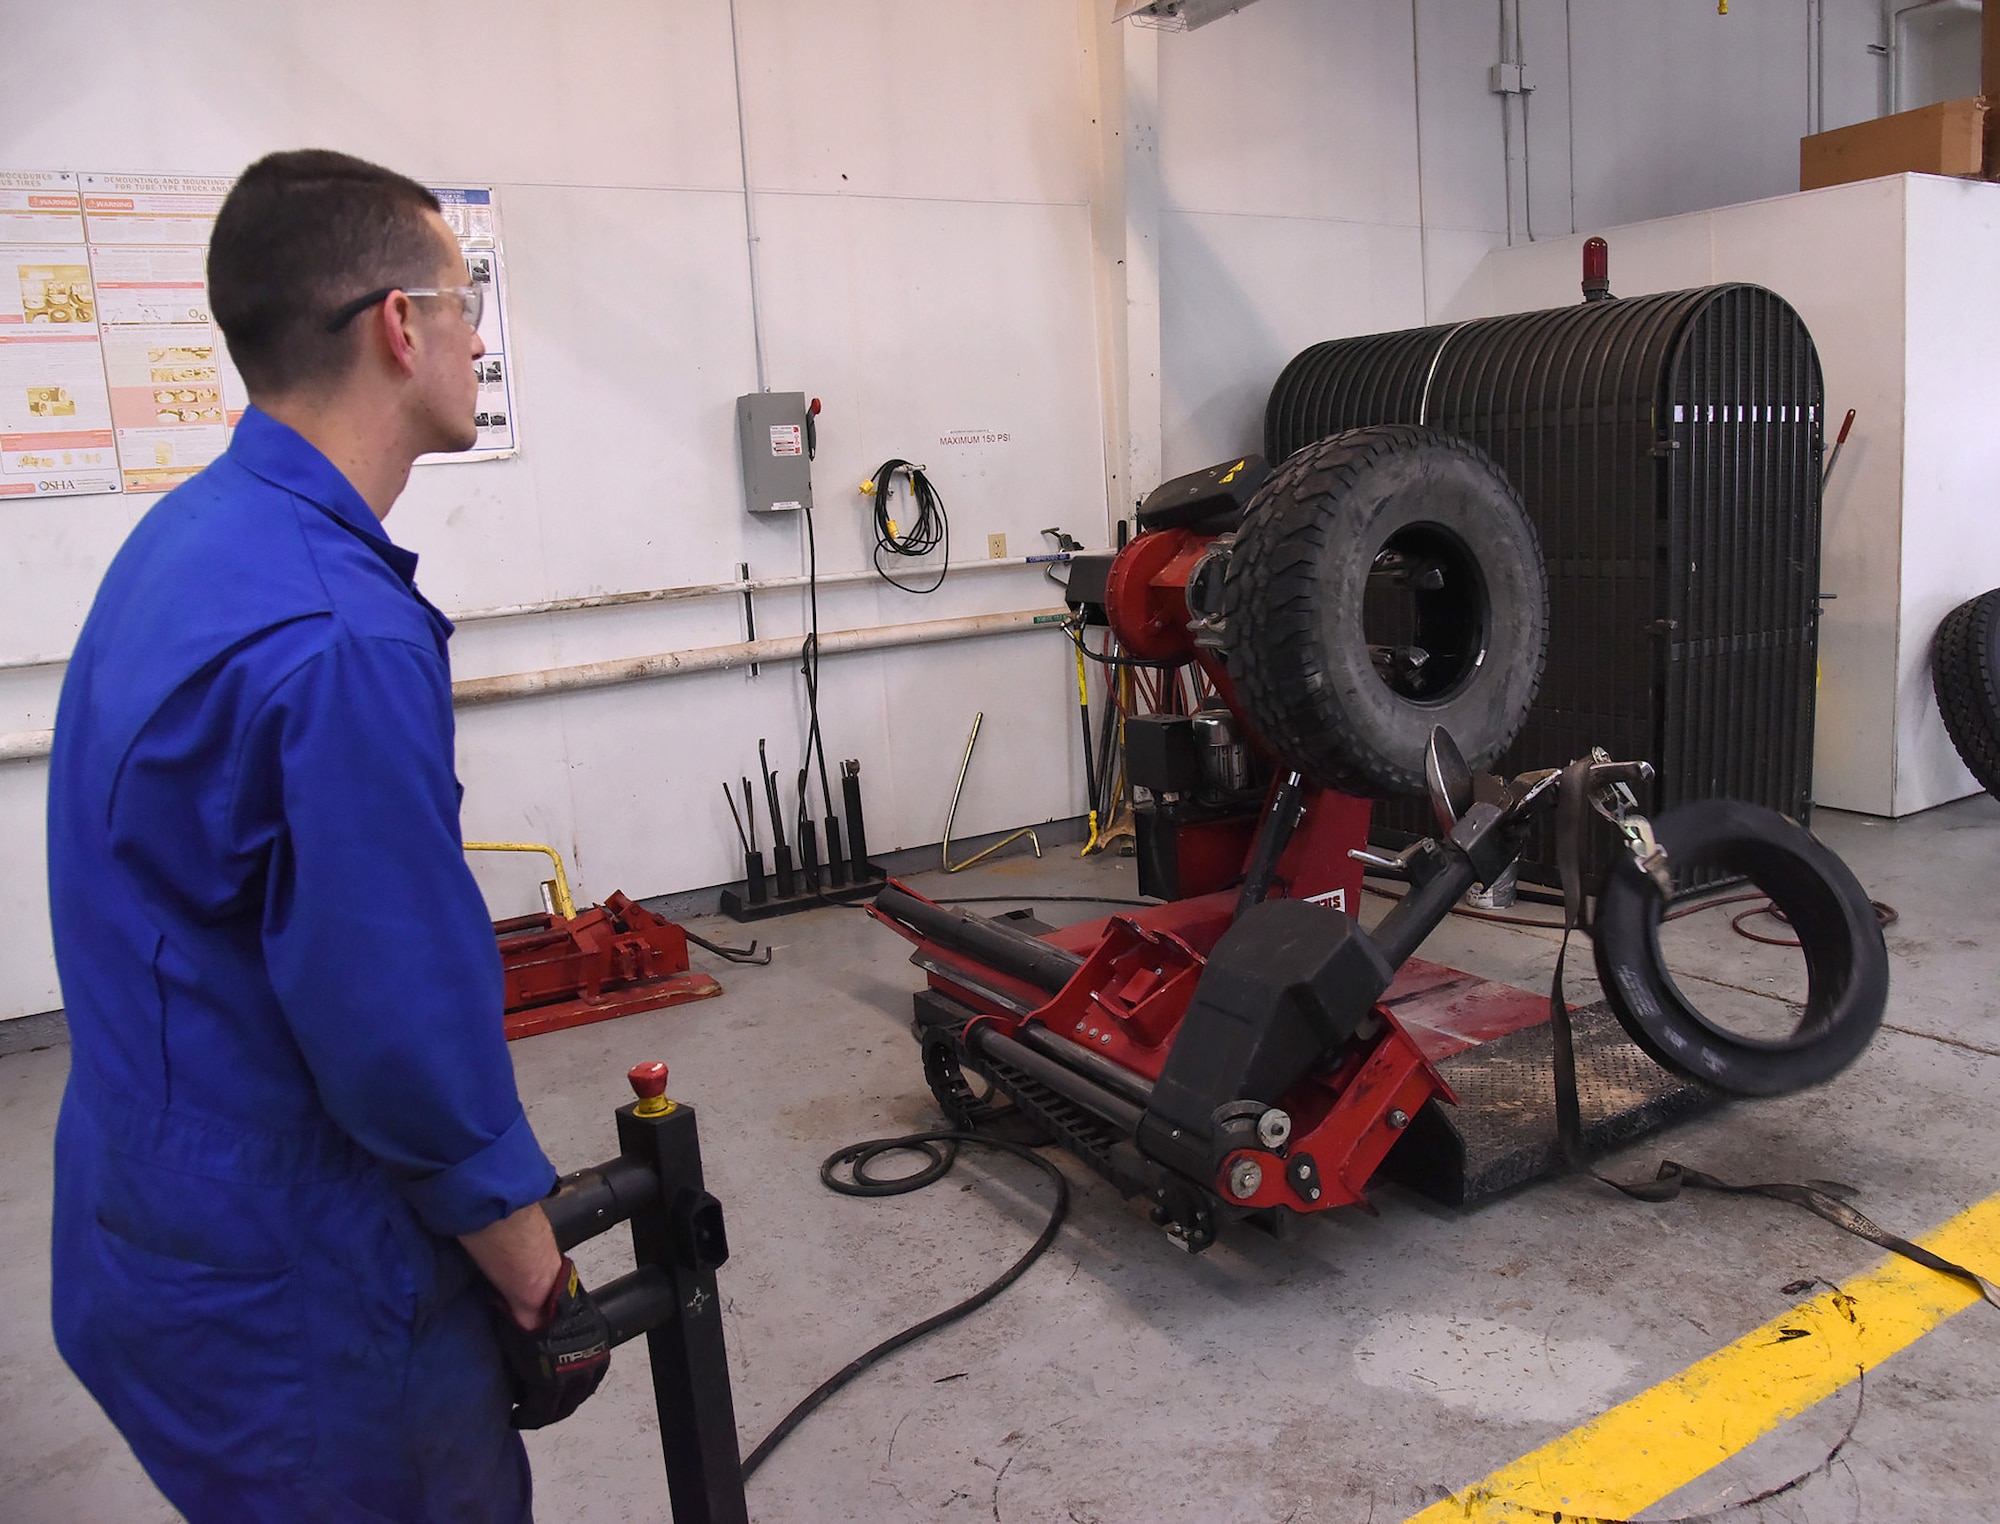 Airman 1st Class Johnathan Allen, 341st Logistics Readiness Squadron vehicle maintenance apprentice, removes run flats from damaged tires to place on new ones Dec. 1, 2016, at Malmstrom Air Force Base, Mont. Run flats are tires designed to resist the effects of deflation if punctured, allowing the driver to continue driving at reduced speeds for a limited distance. (U.S. Air Force photo/Senior Airman Jaeda Tookes)

